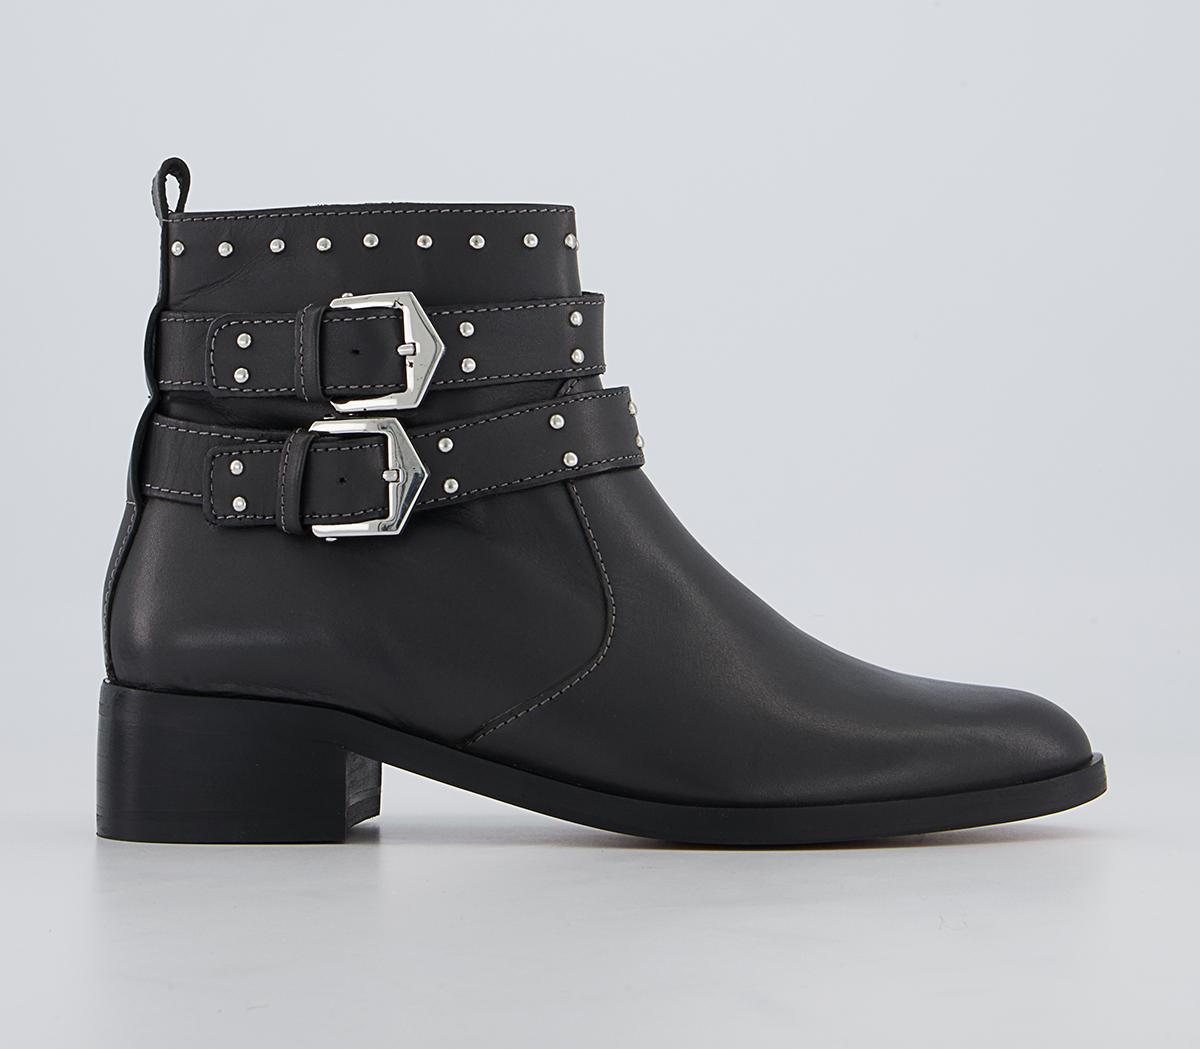 OFFICE Anchor Double Buckle Studded Ankle Boots Dark Grey Leather ...